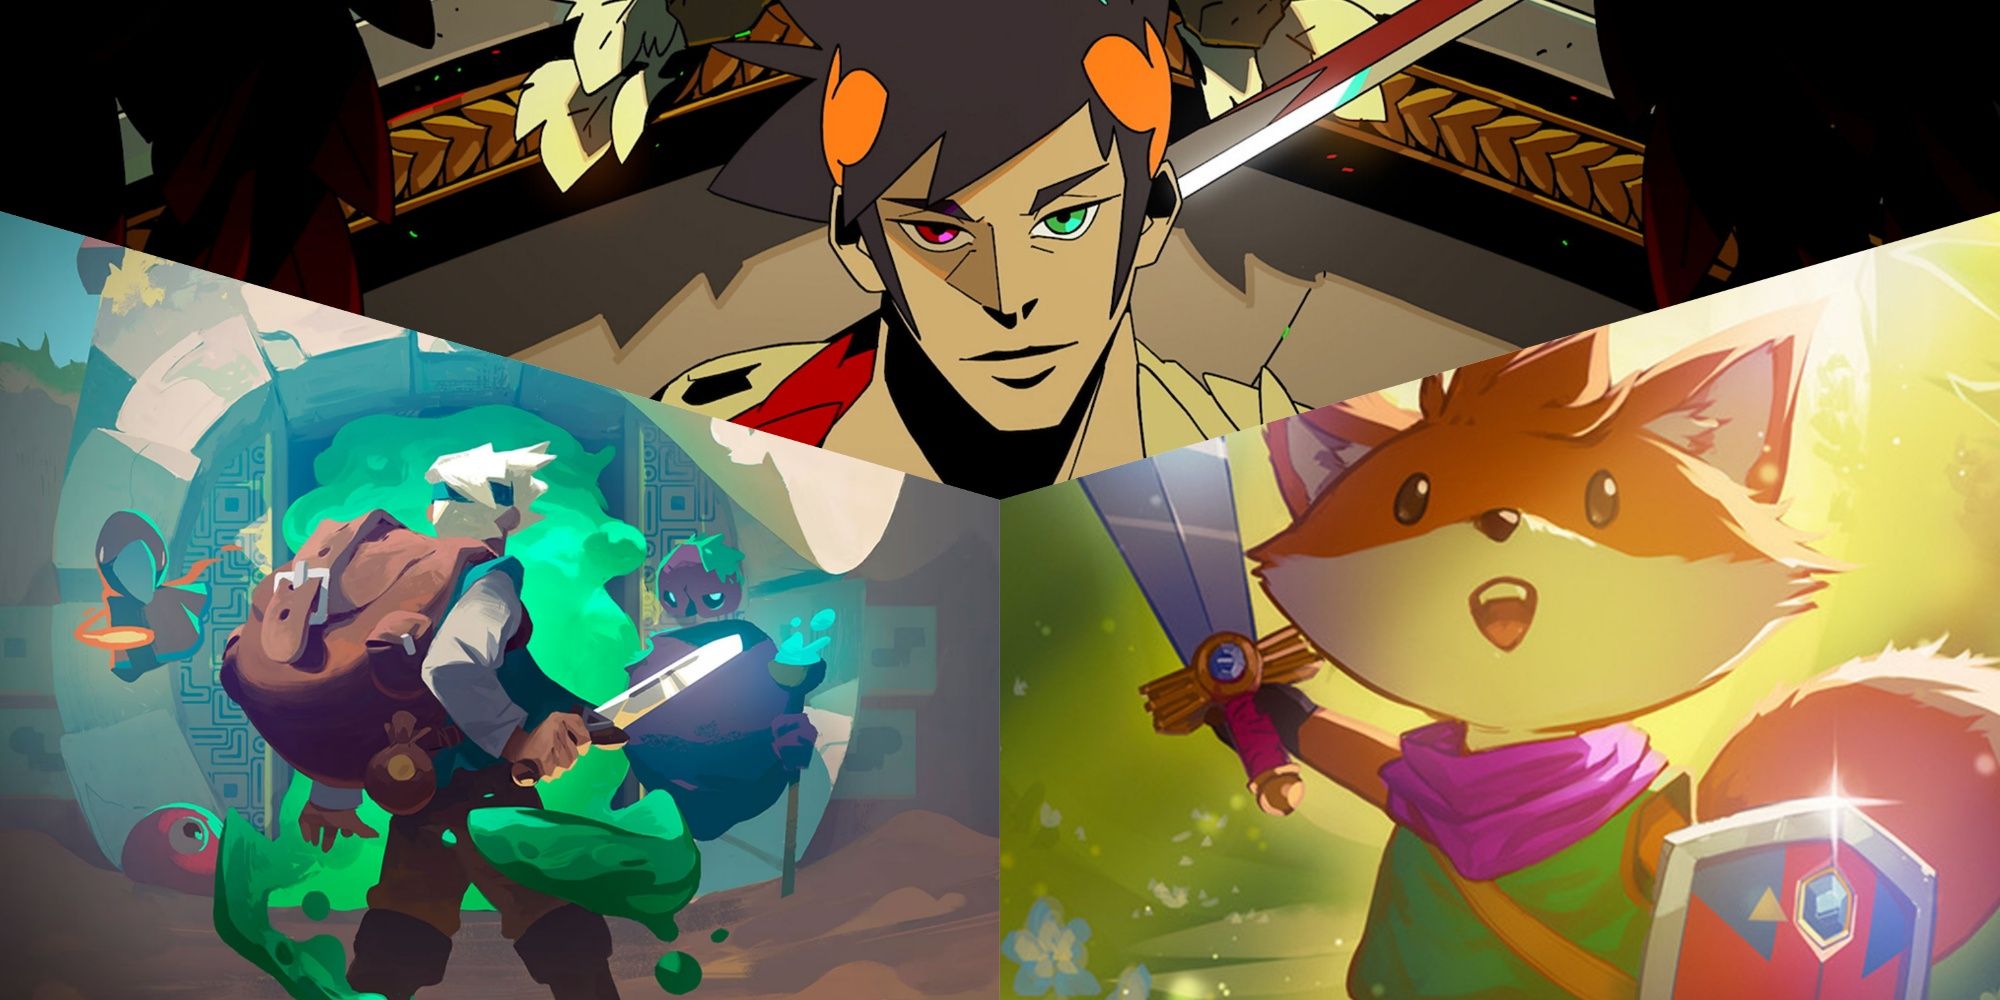 Zagreus From Hades, Fox From Tunic, And Will From Moonlighter